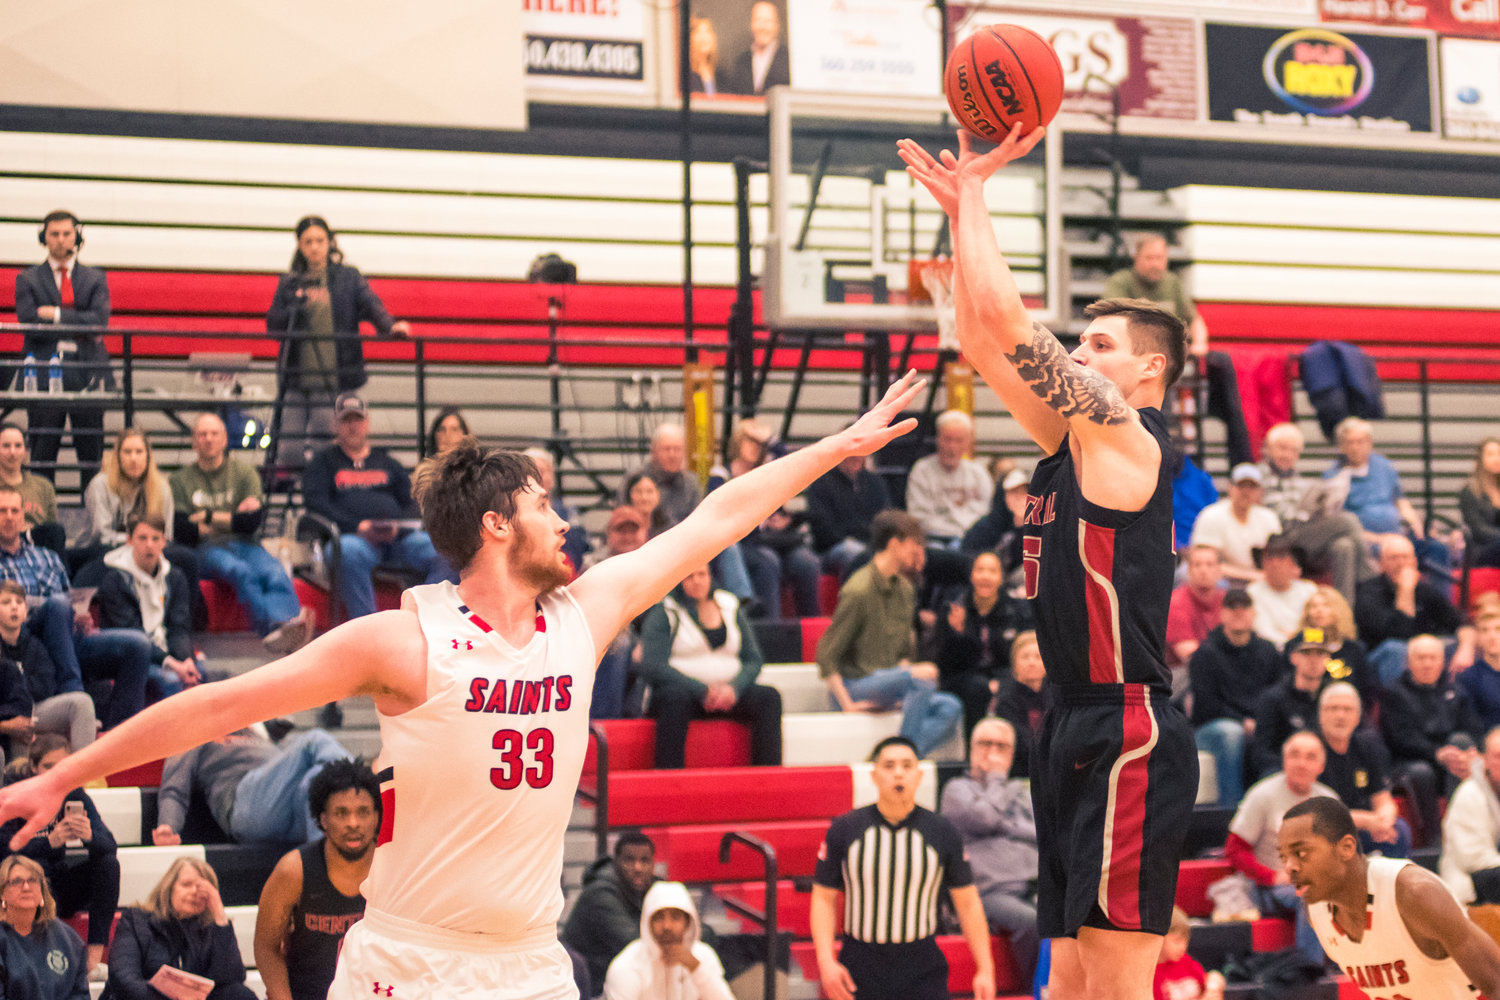 Central's Matt Poquette (25) goes up for a shot during a game Thursday night at Saint Martin's University.